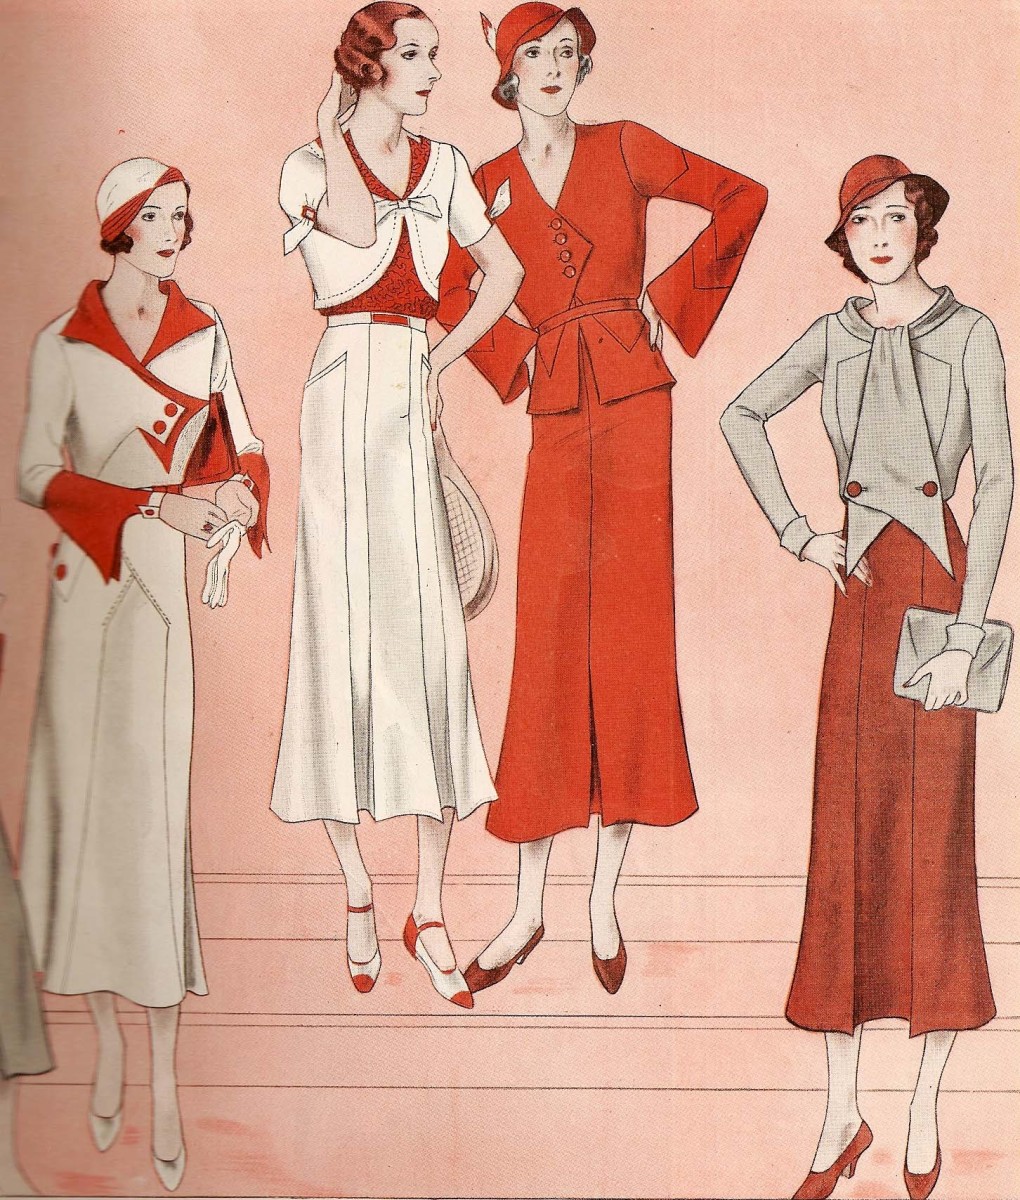 The four sportswear dress patterns featured here were described as 'what to wear when you play.'